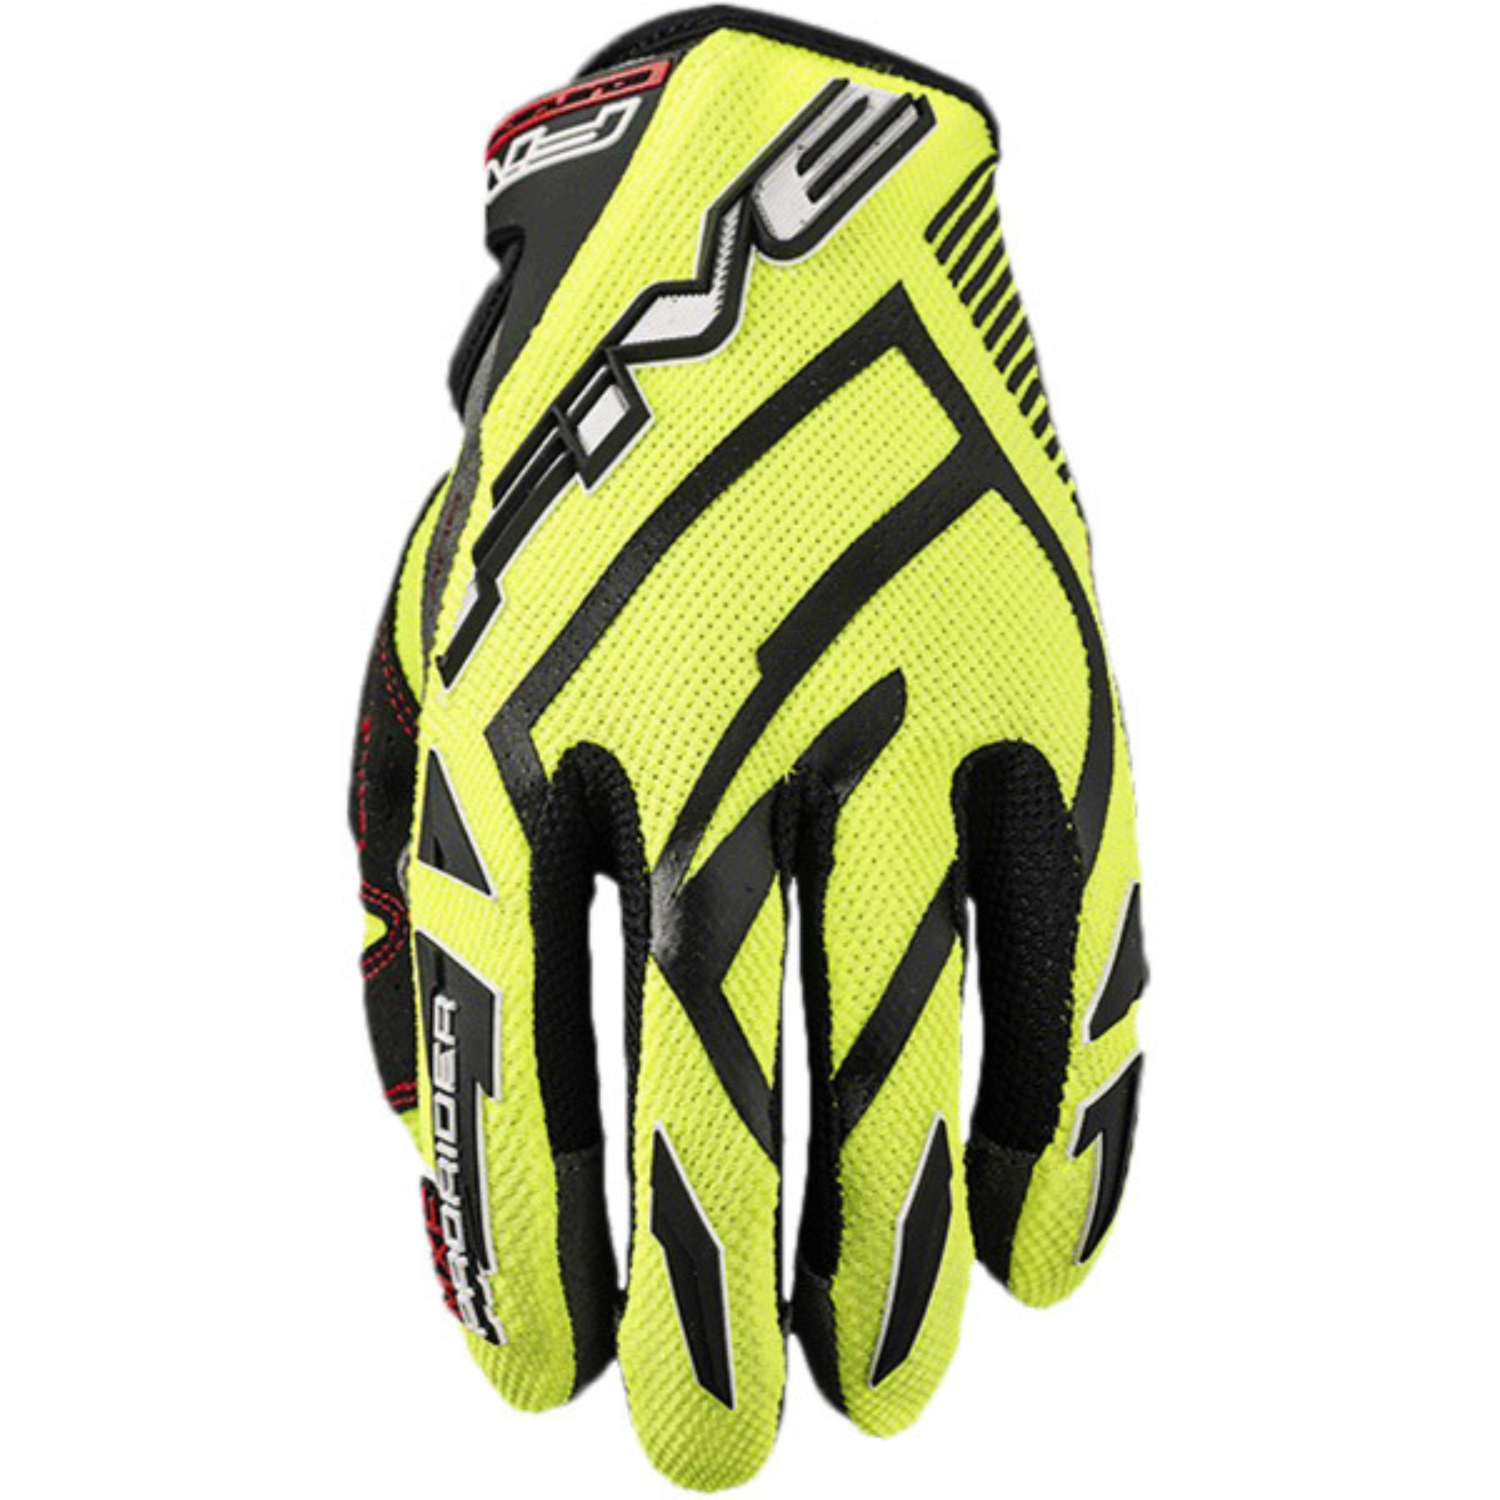 Image of EU Five MXF Prorider S Gloves Black Yellow Taille XL